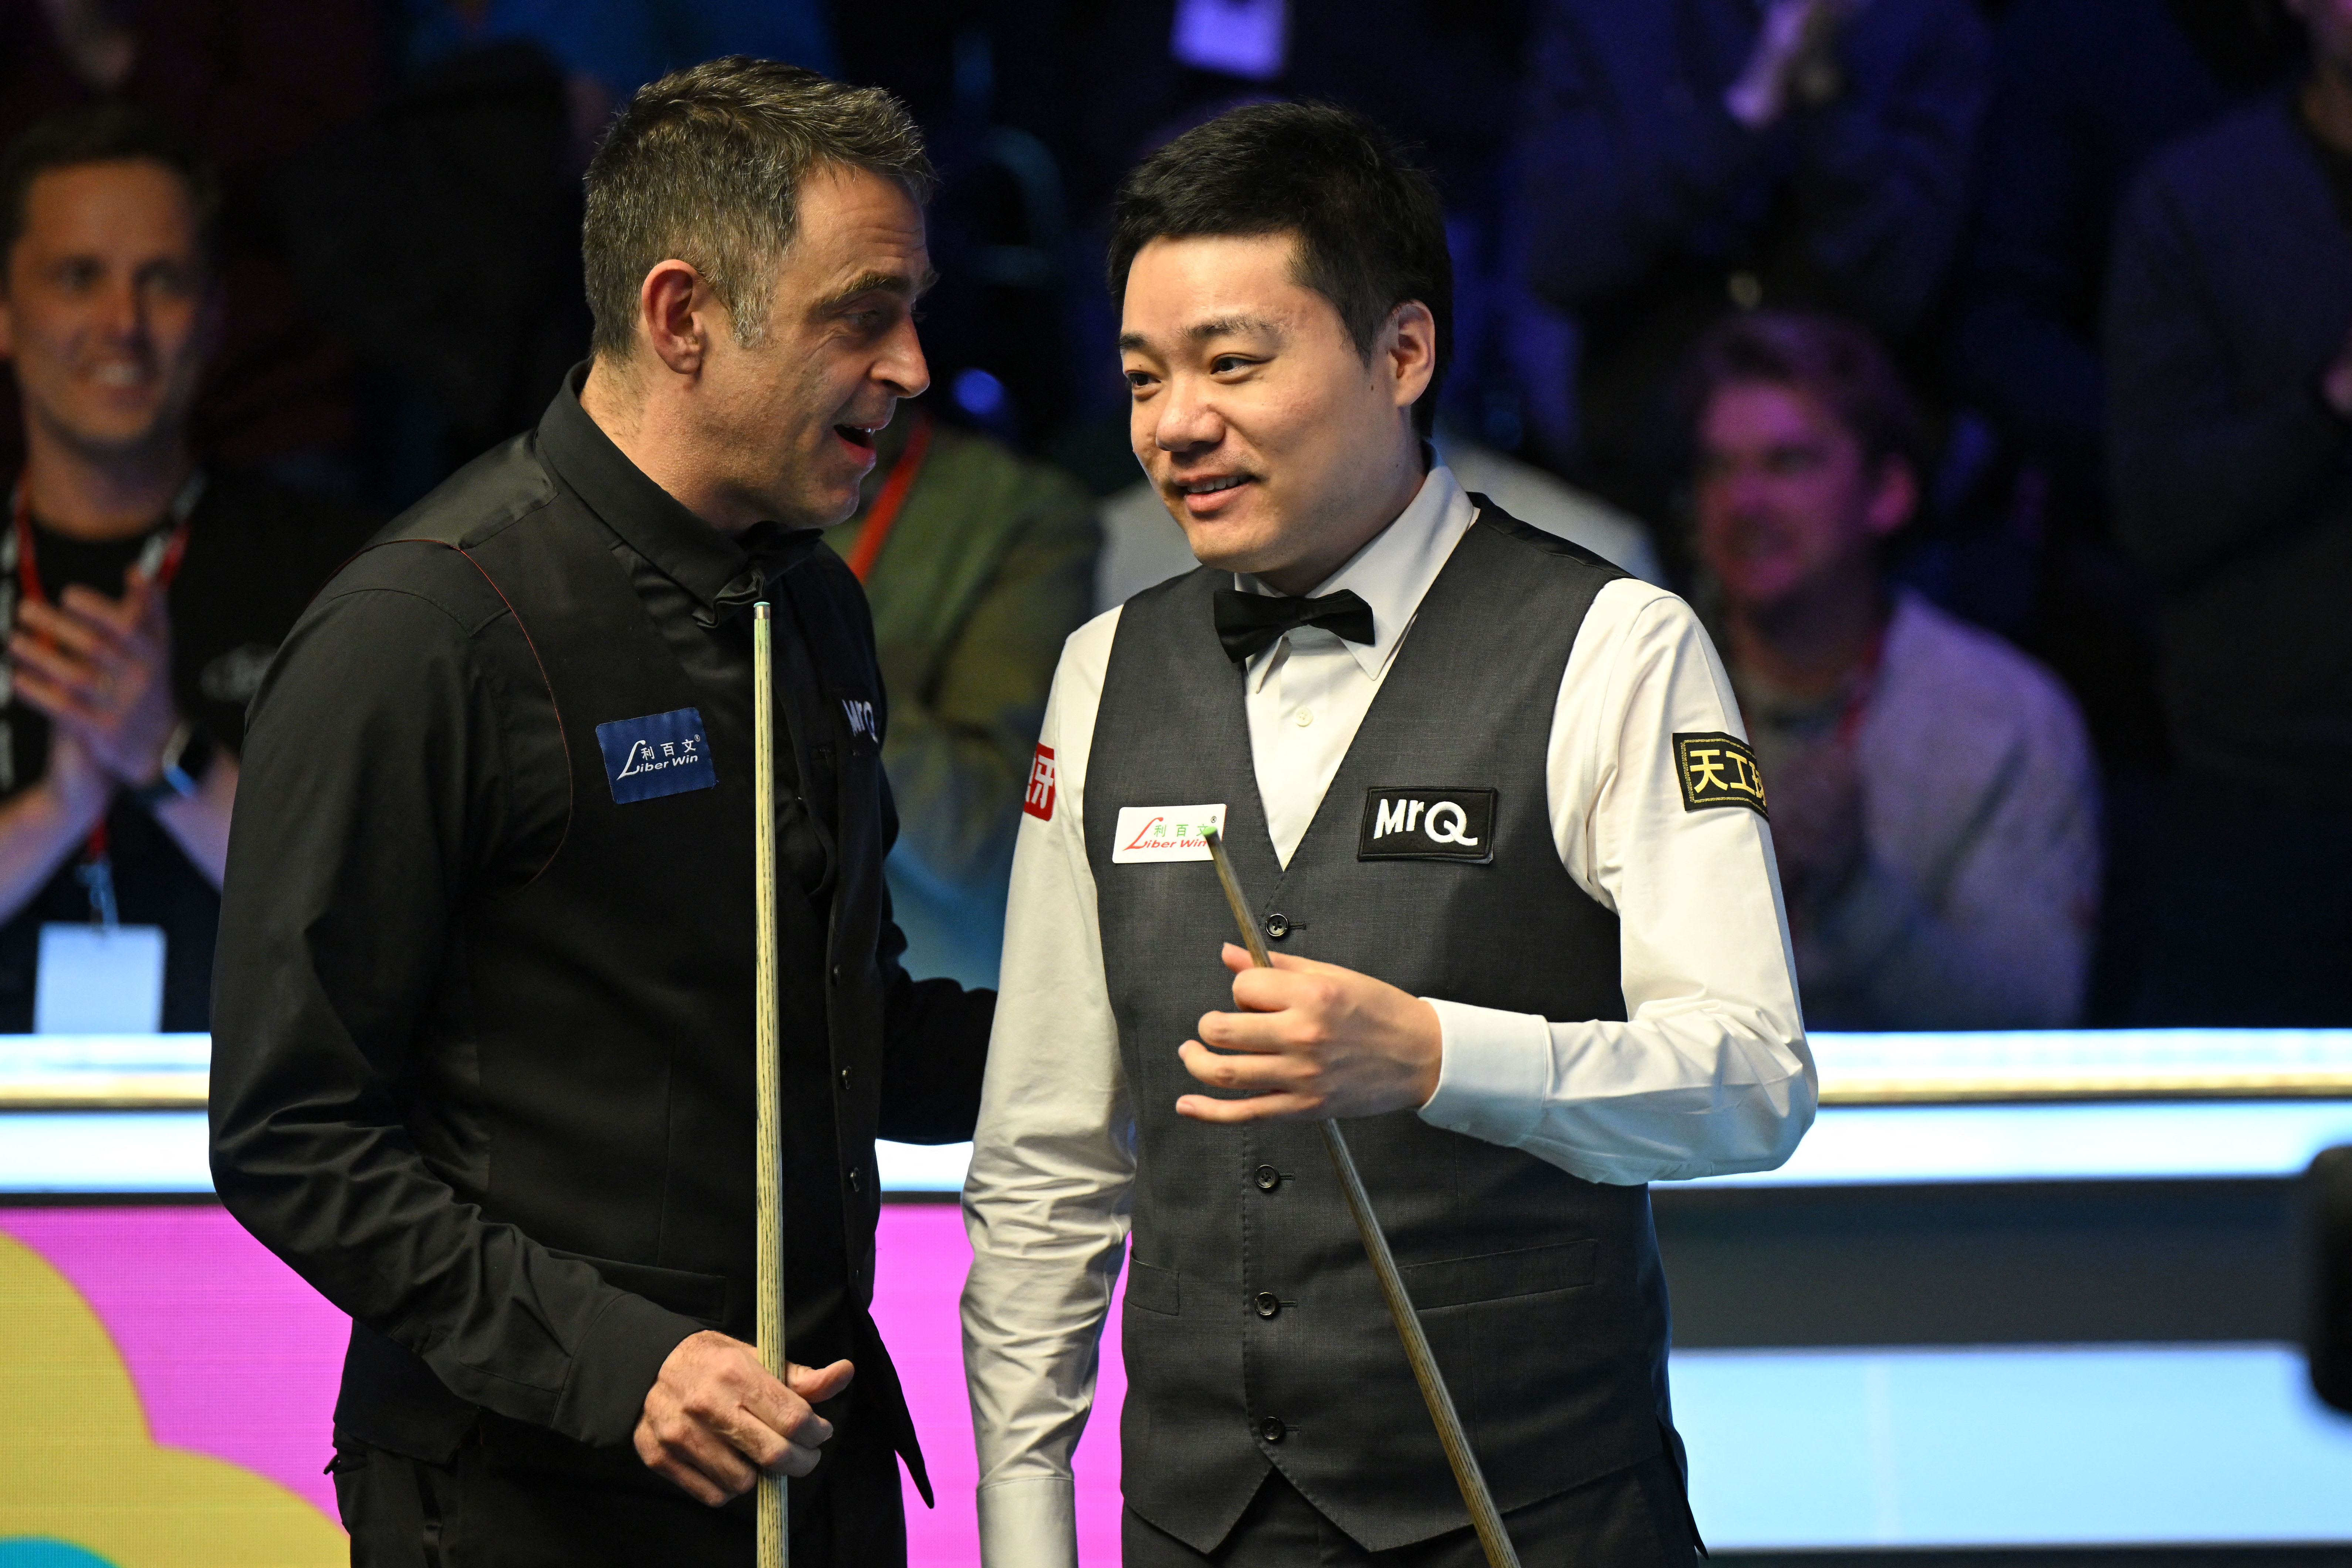 O'Sullivan owned up to a foul in favour of Ding Junhui after it was missed by the ref